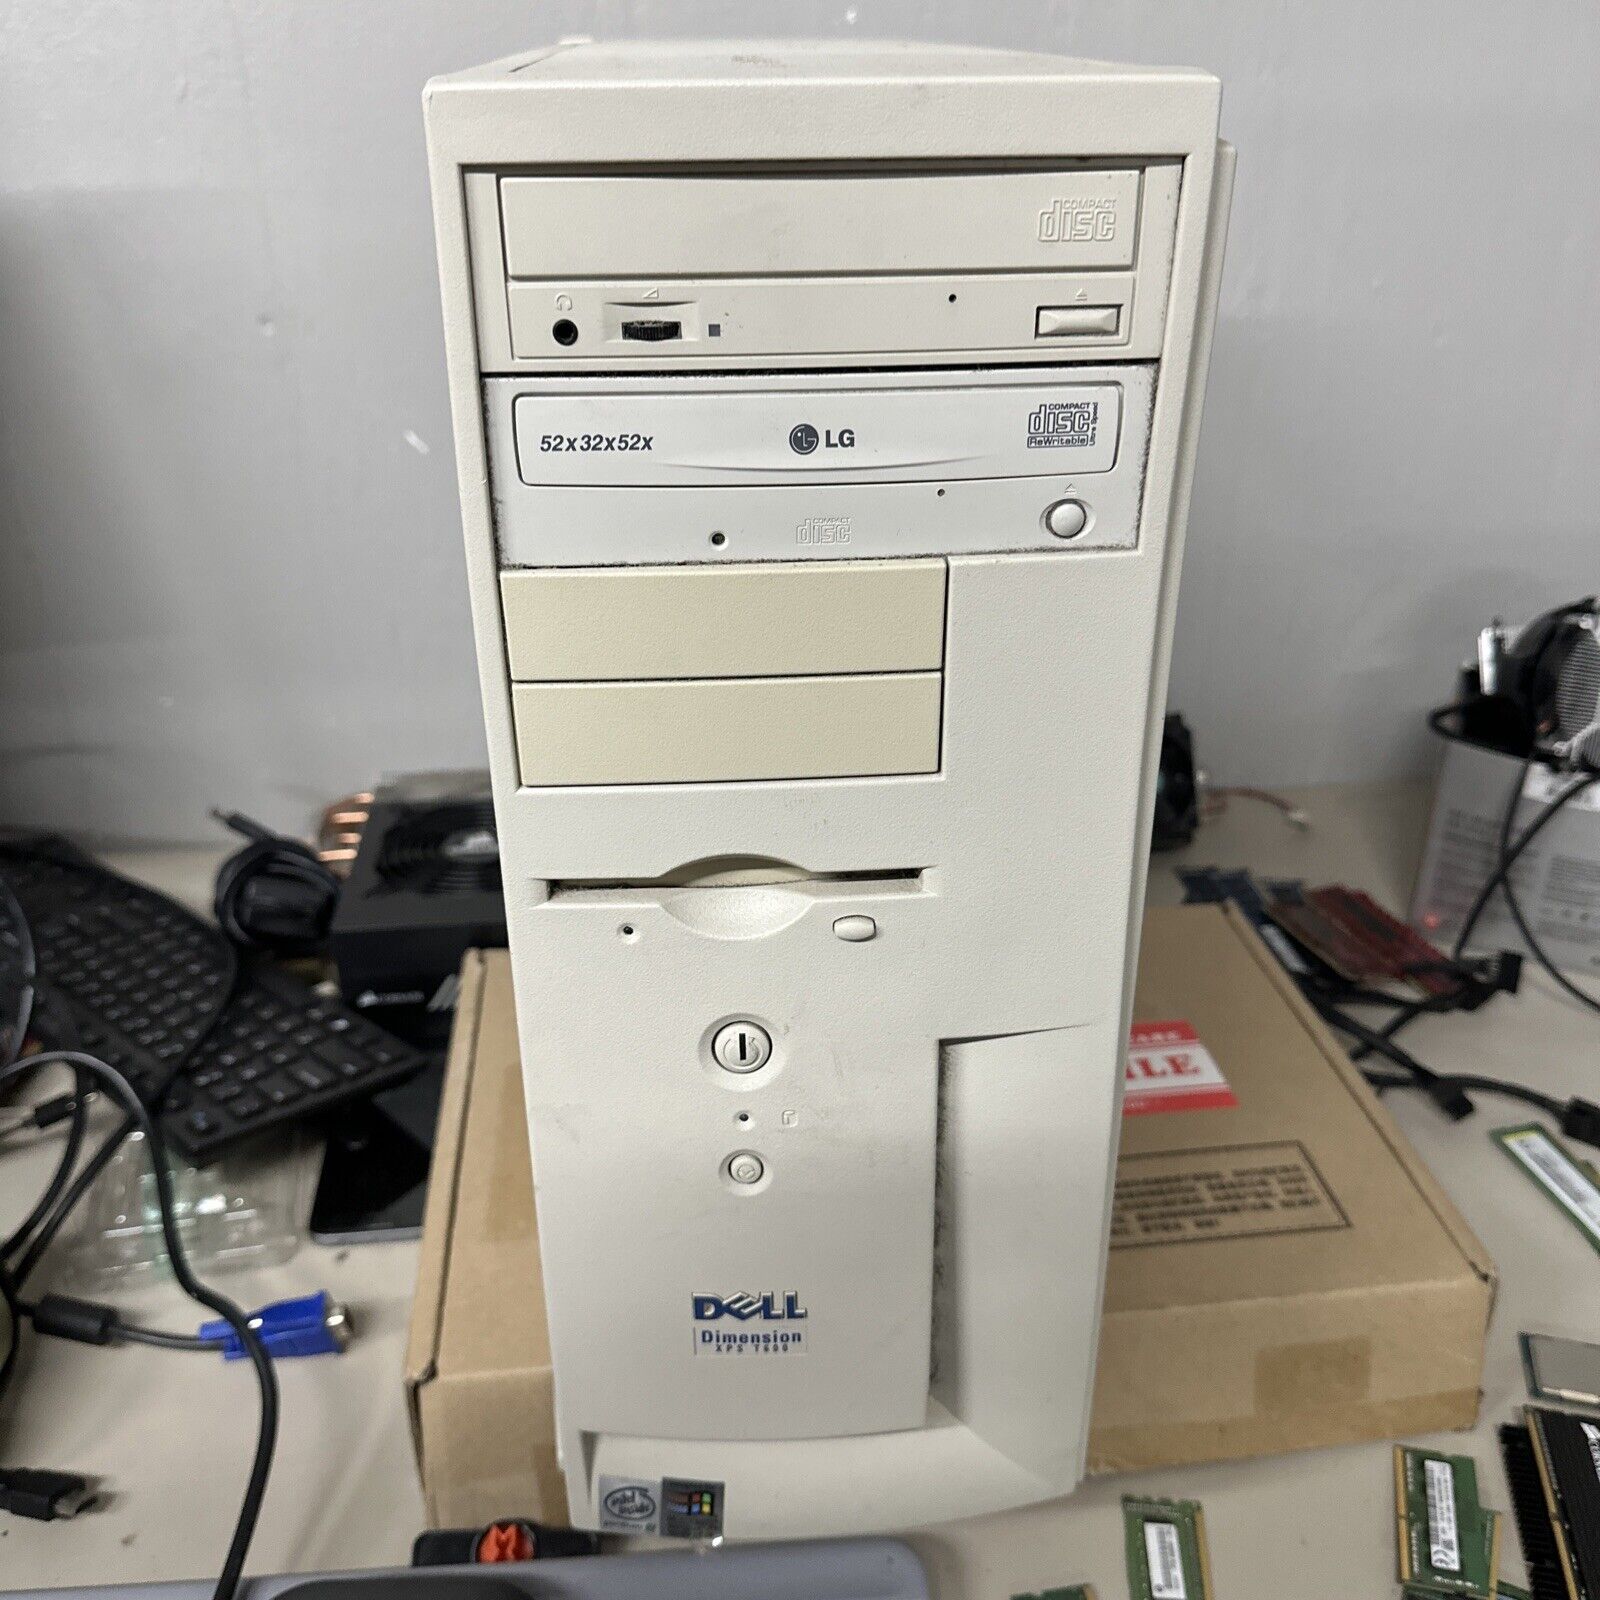 1999 Dell Dimension XPS T600r Intel Pentium III 600MHz 128MB RAM - No HDD Or OS